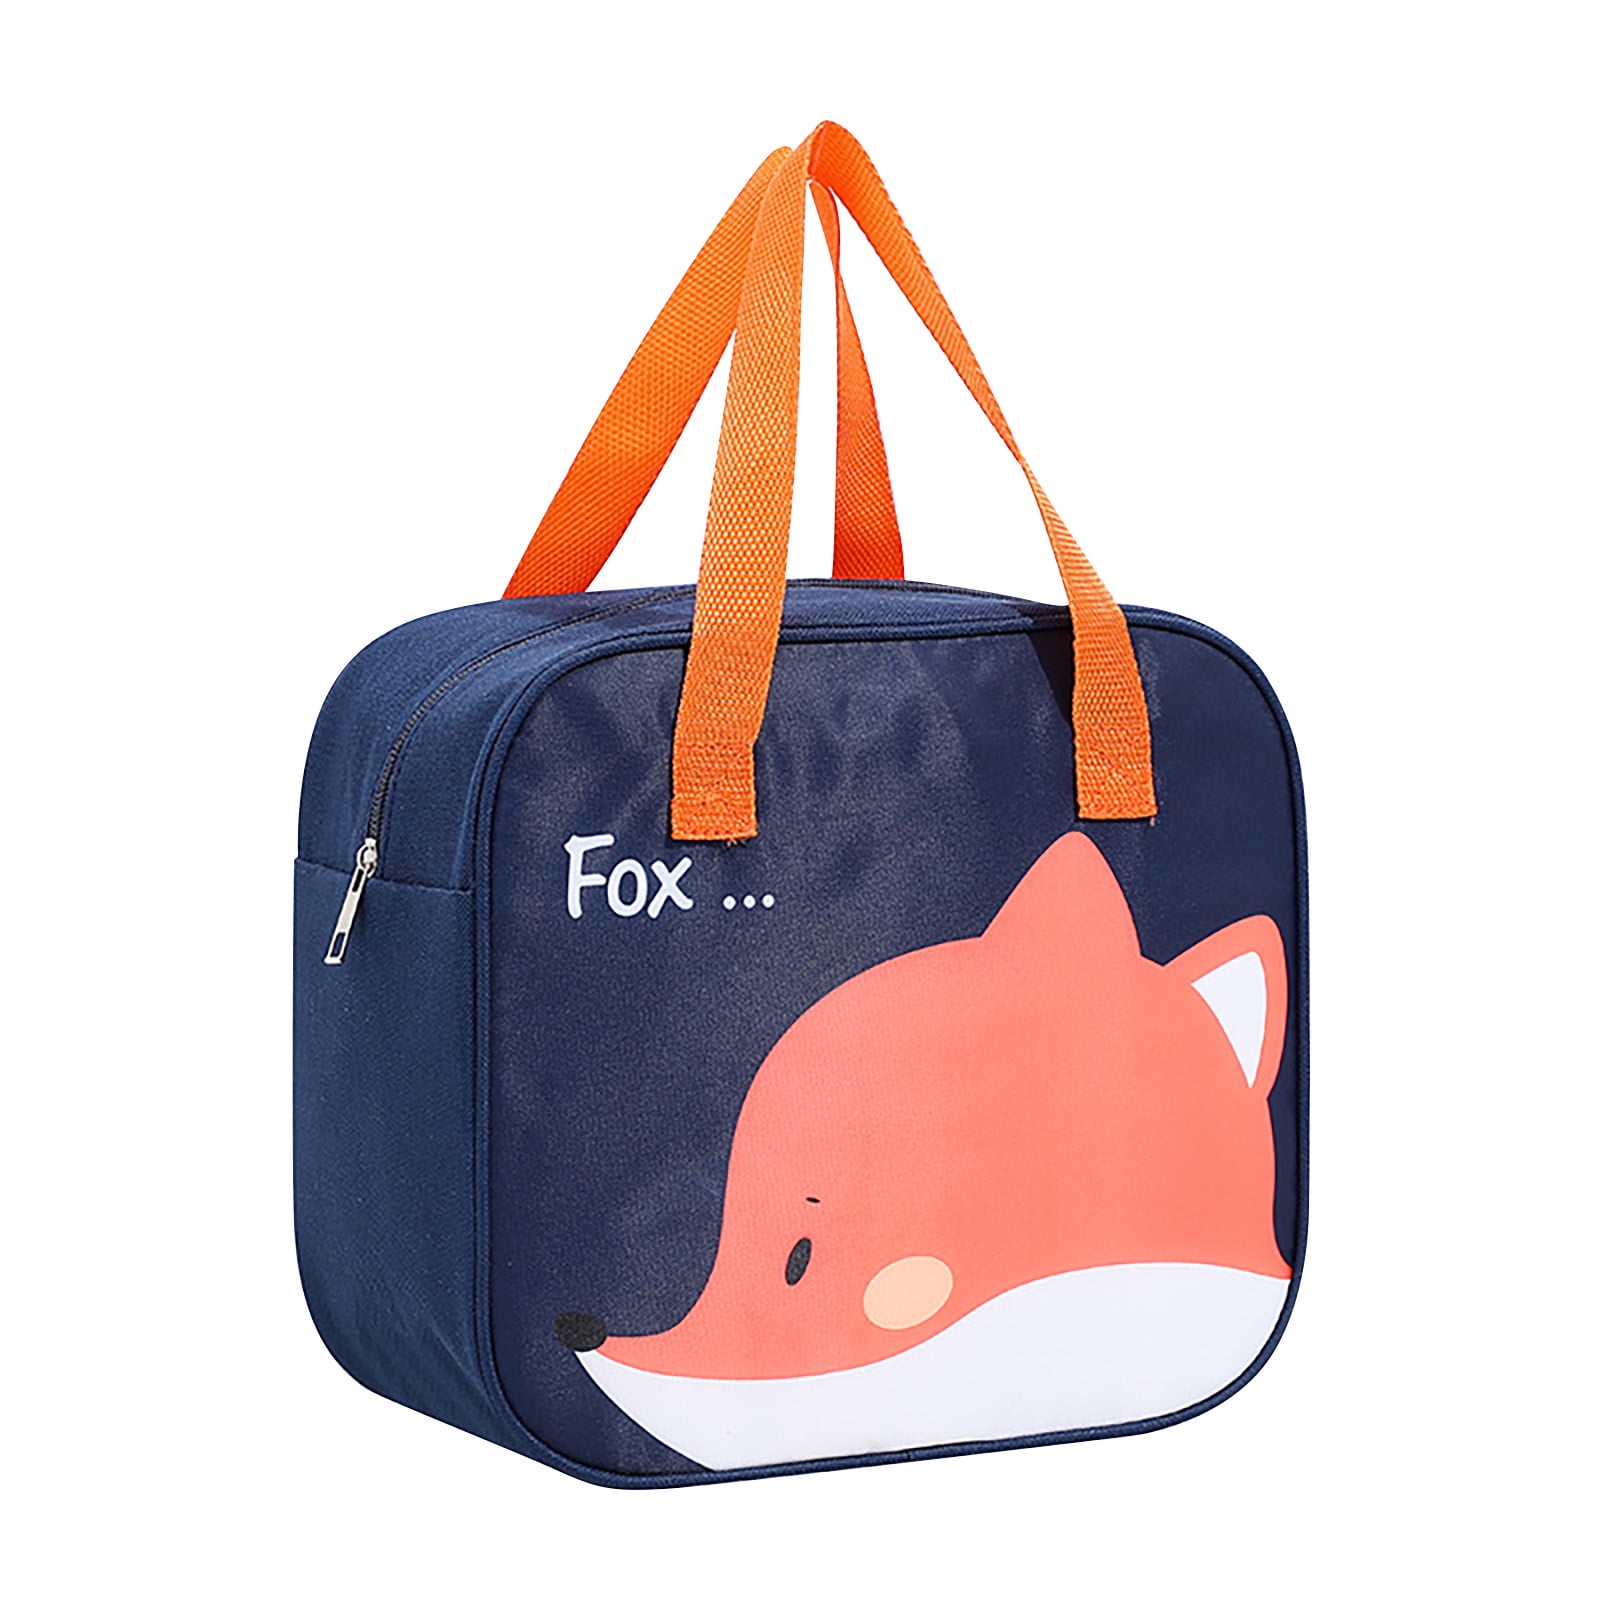 Cartoon Daiso Lunch Bag For Kids Boys Girls School Bento Box Container  Reusable Insulated Lunch Tote Bags From Esw_house, $2.43